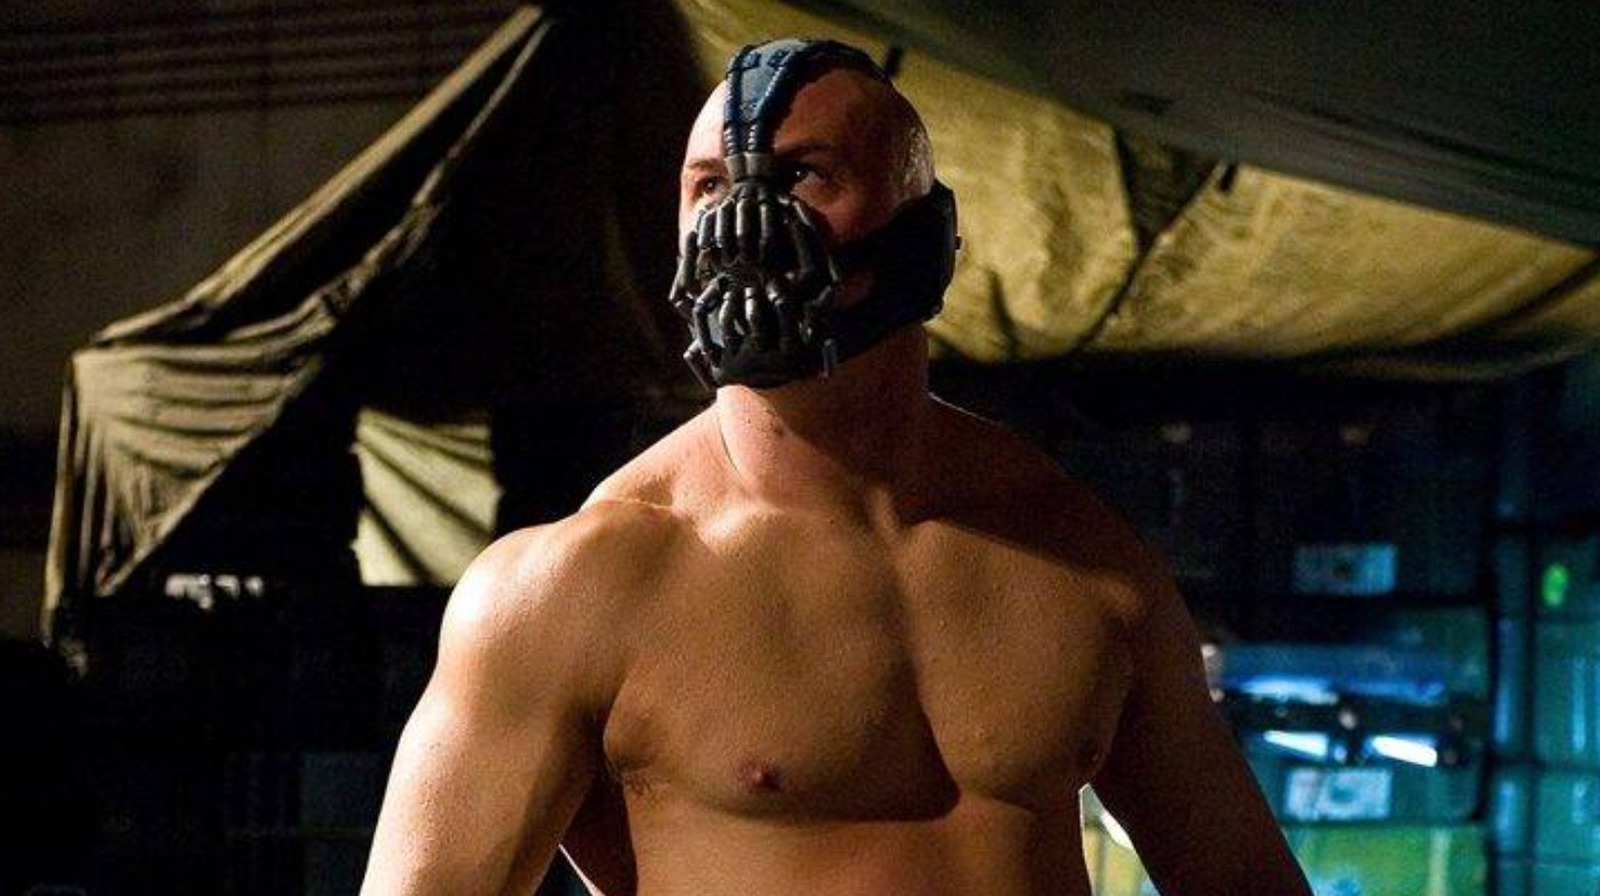 How The Dark Knight Rises Changed Tom Hardy Forever